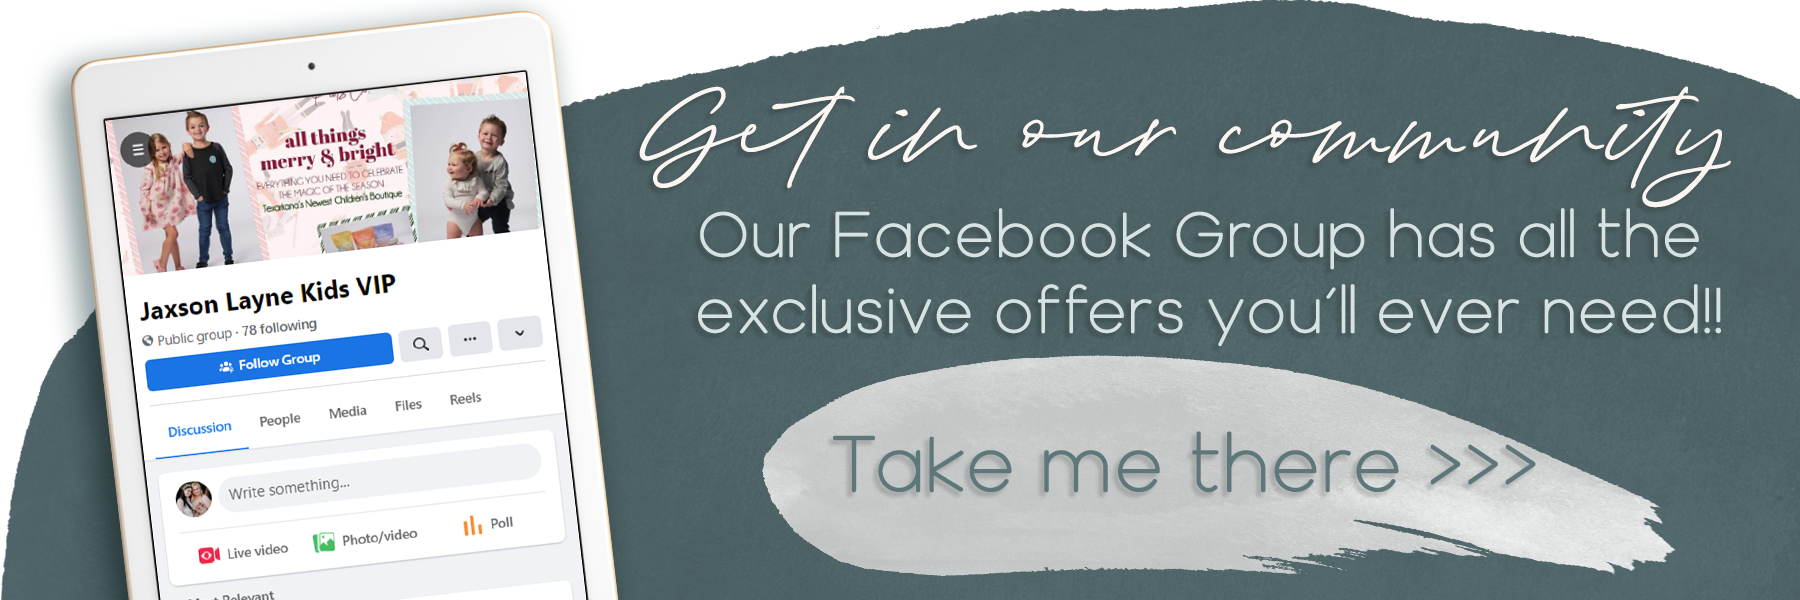 Get in our community. Our Facebook Group has all the exclusive offers you'll ever need! Take me there